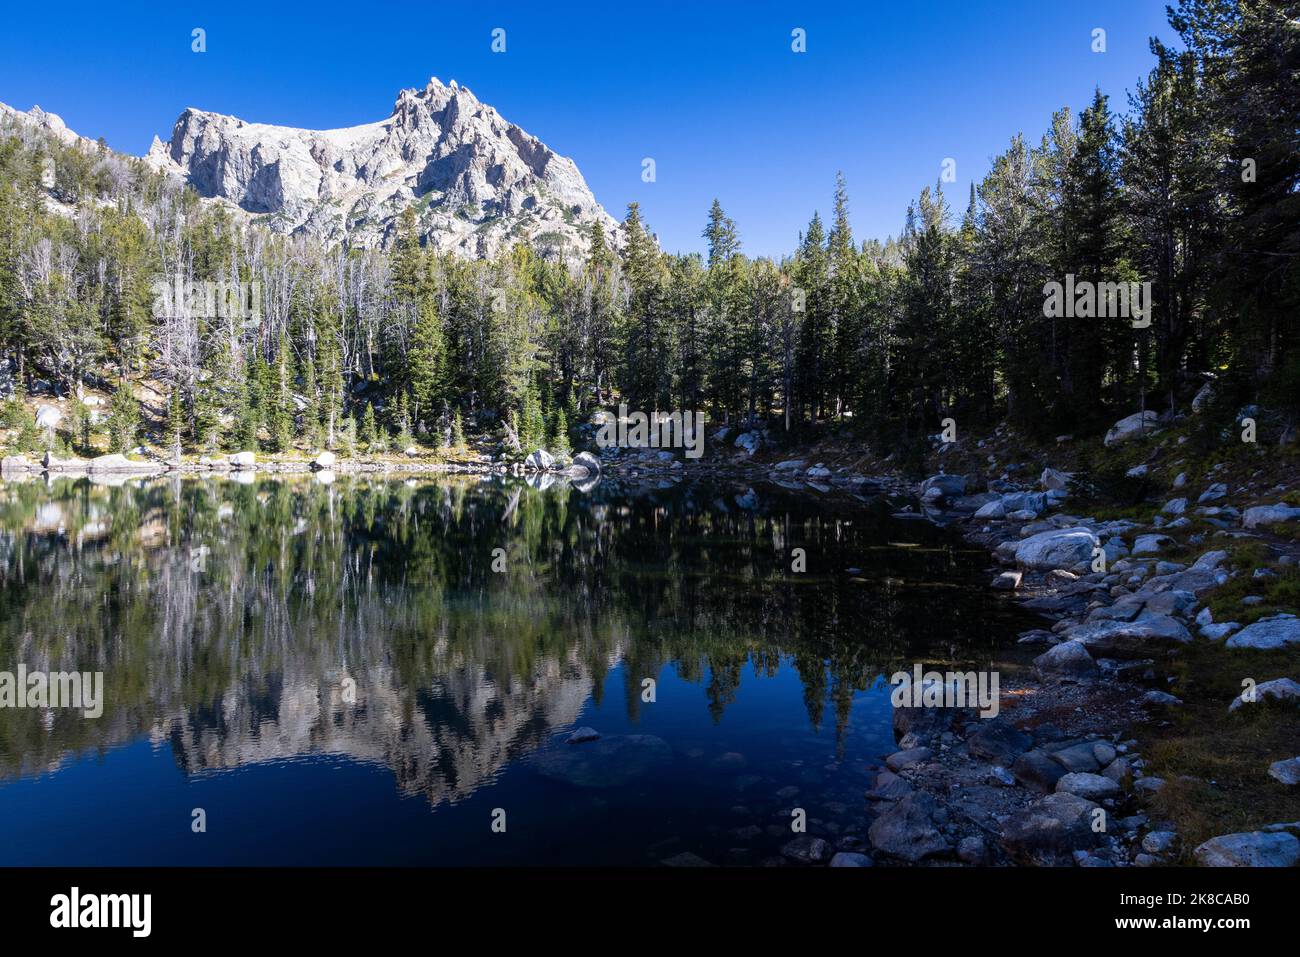 Teewinot reflected in the calm waters of Surprise Lake in the Teton Mountains. Grand Teton National Park, Wyoming Stock Photo